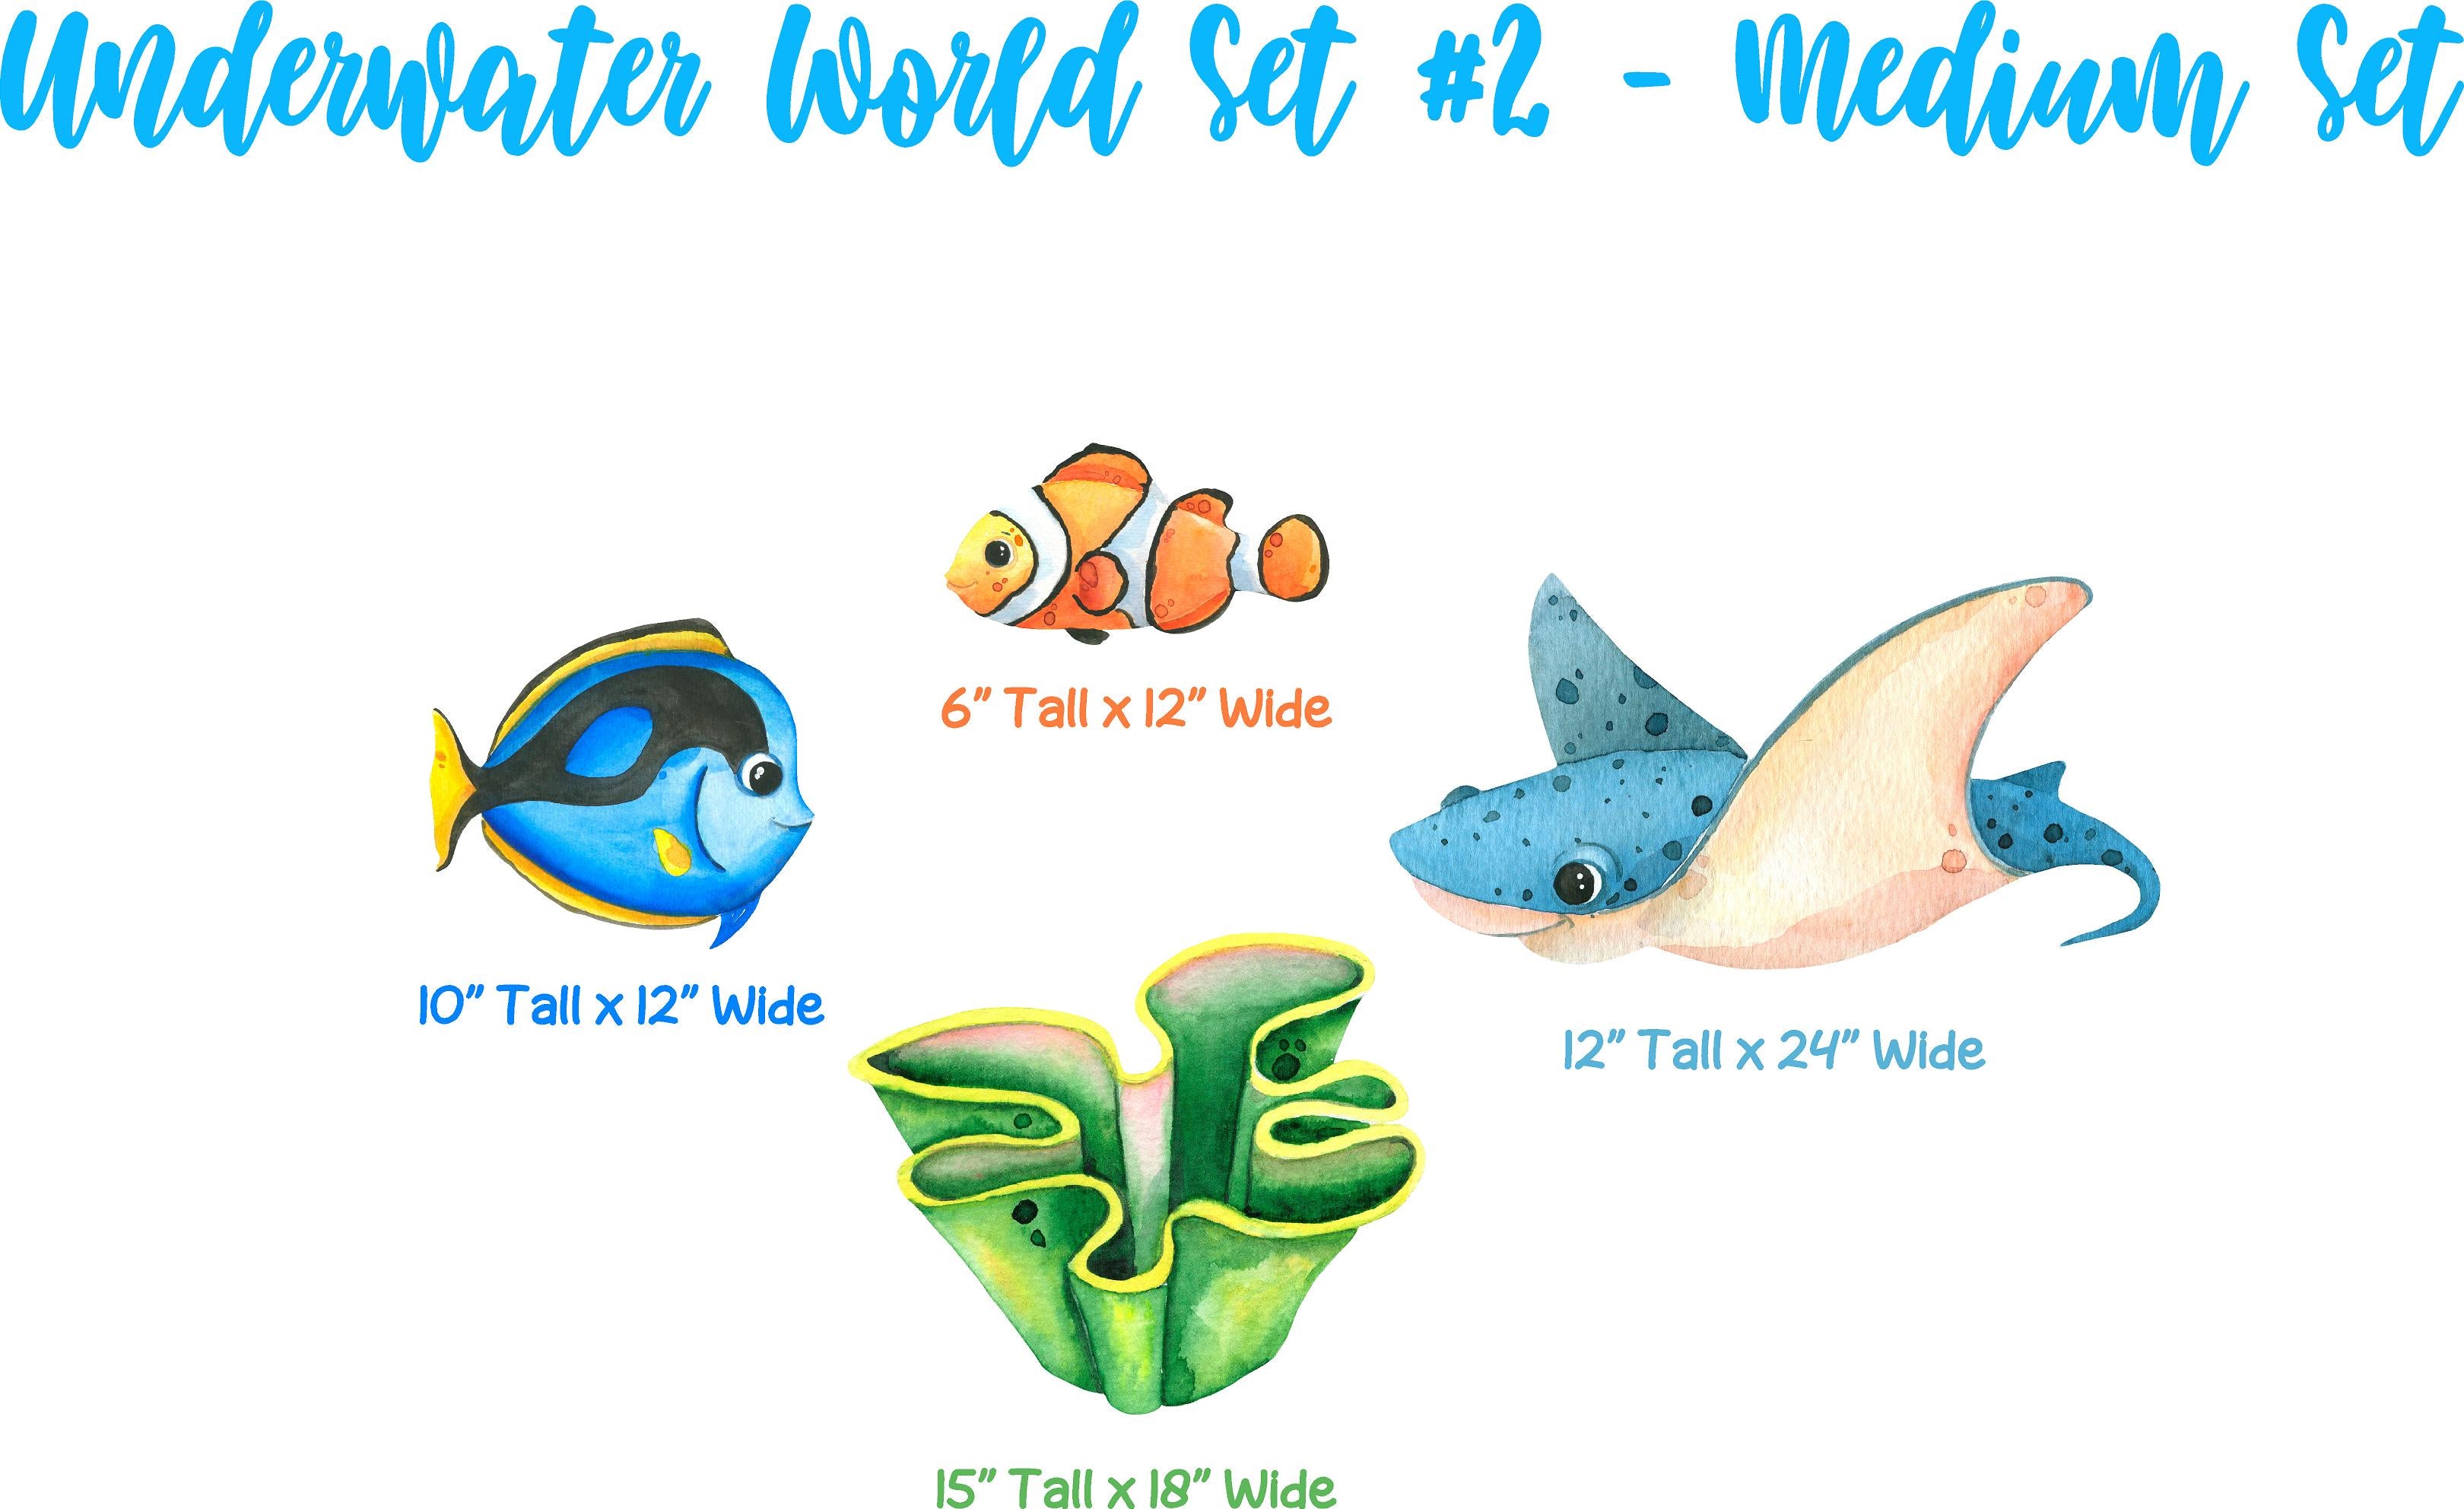 Underwater World Set #2 Wall Decal Ocean Sea Life Removable Fabric Wall Sticker - Stingray, Fish, Seaweed | DecalBaby